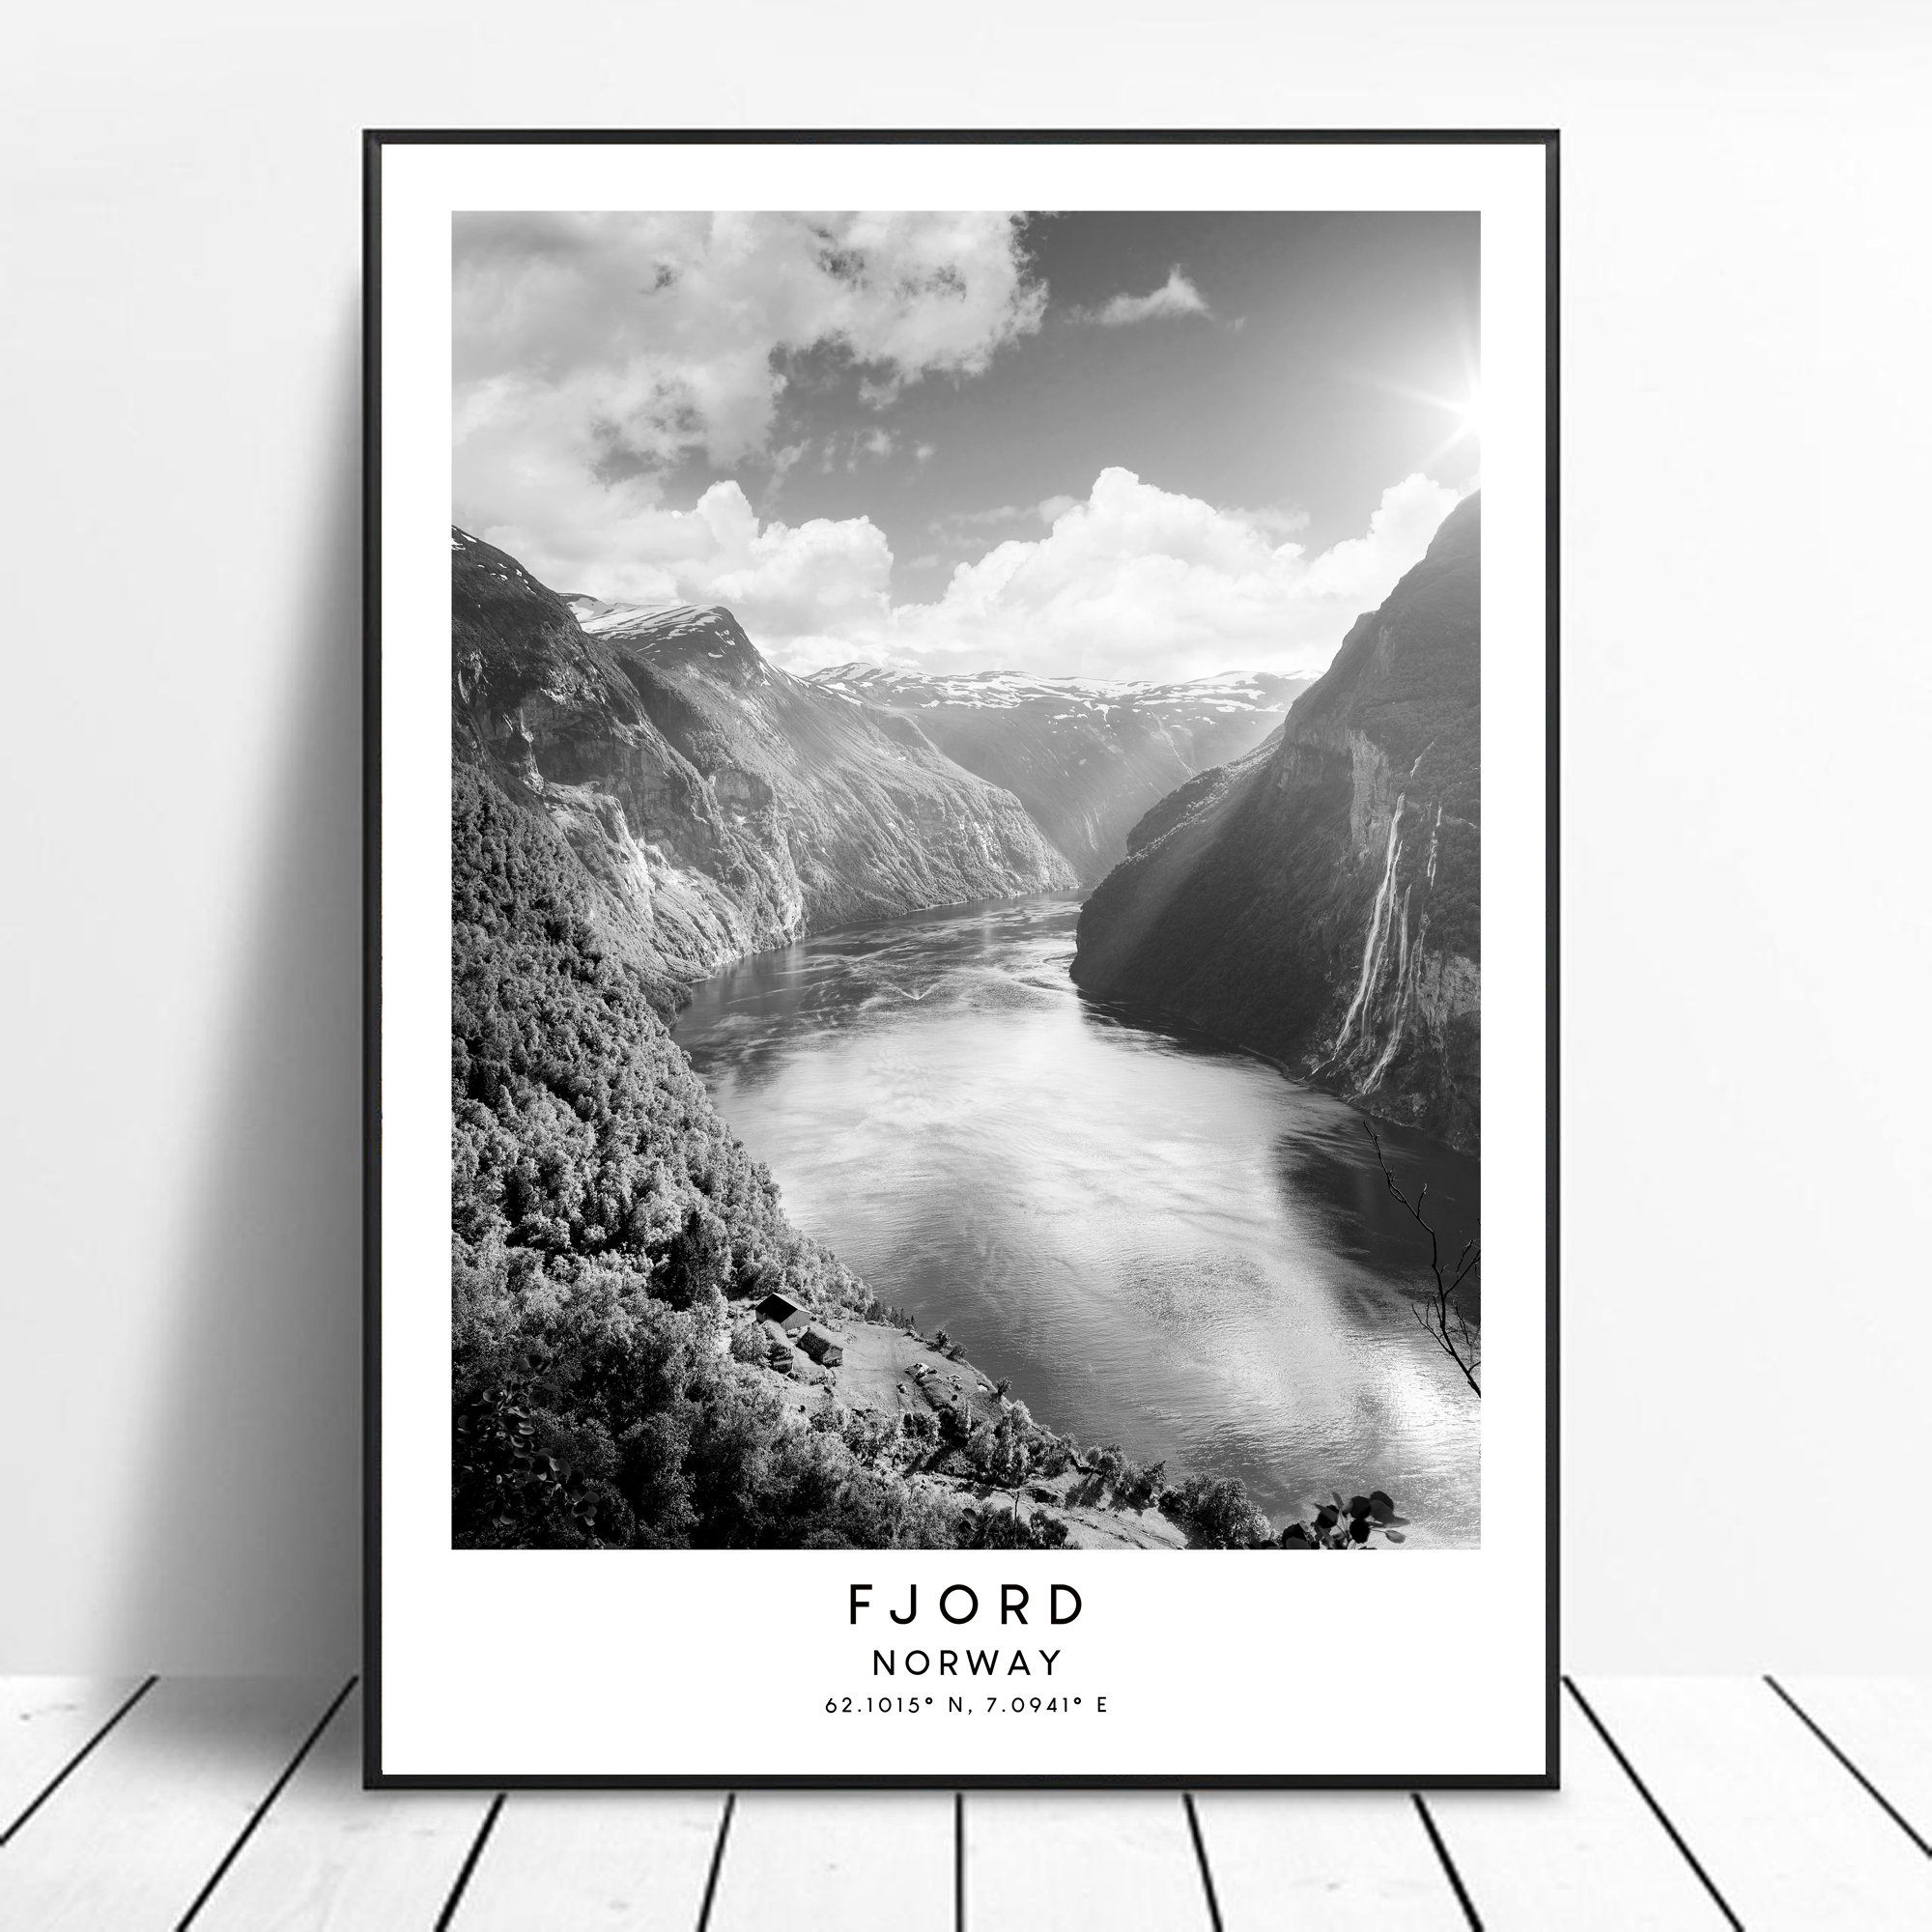 Norway Travel Fjord Fjord Norway Sweden Wall Norway Poster Print - Art Gift Norway Art Fjord Minimalist Fjord Fjord Print Etsy Print Print Norway